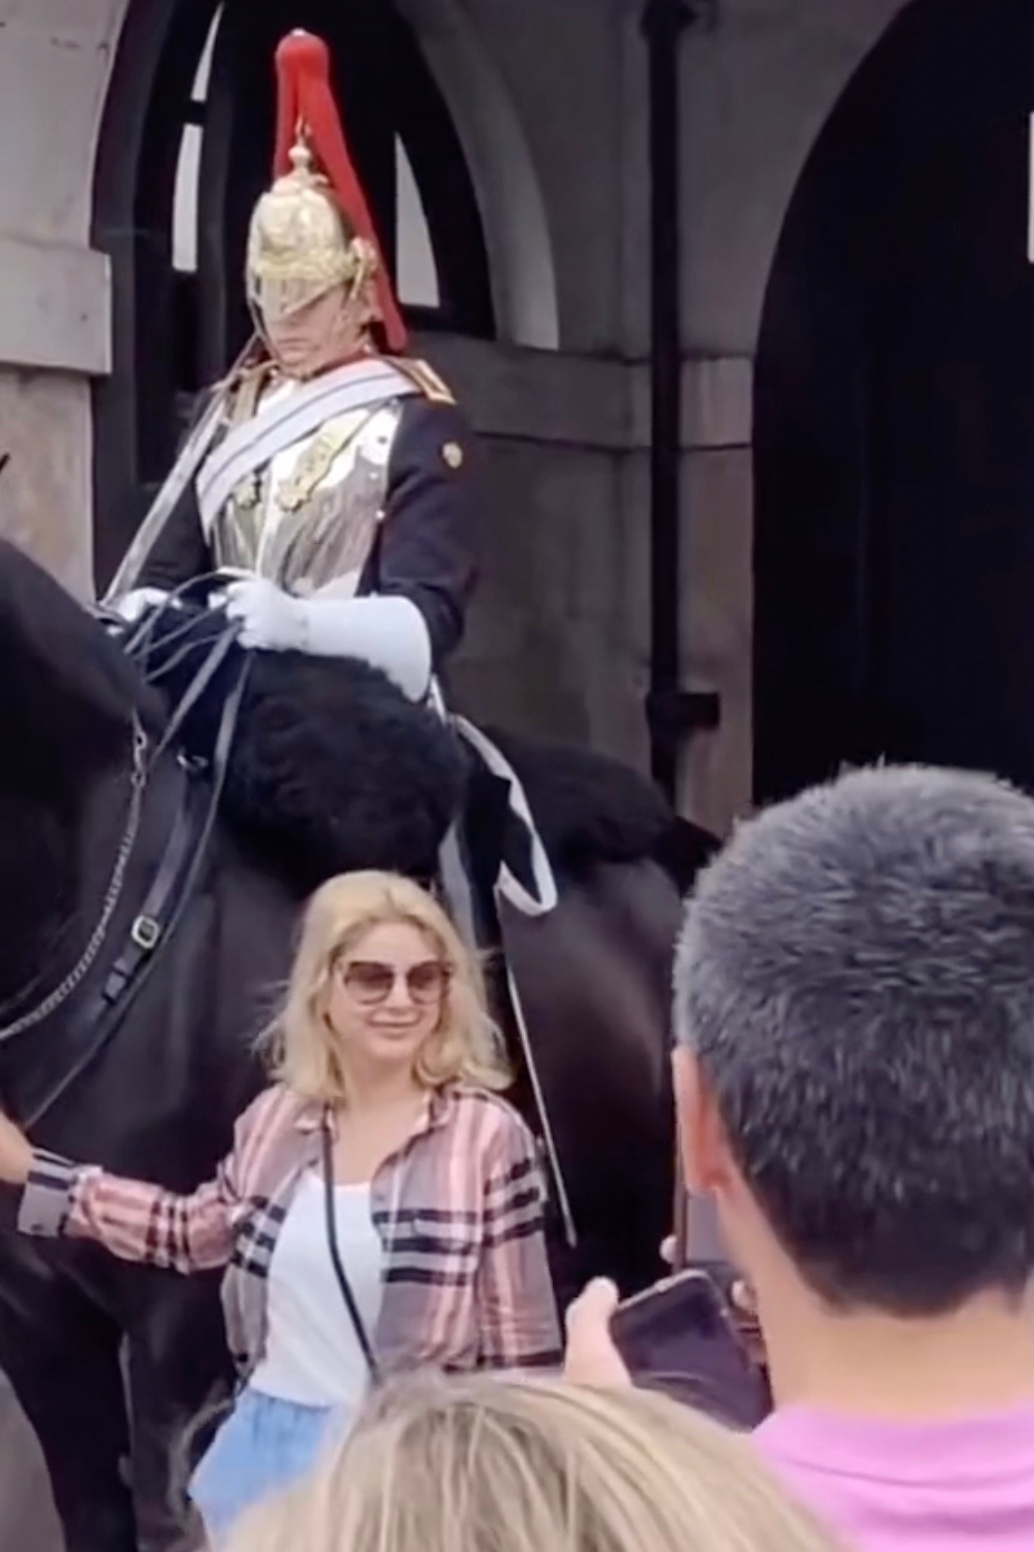 Tourist Screamed At By Queen's Guard After She Touches His Horse